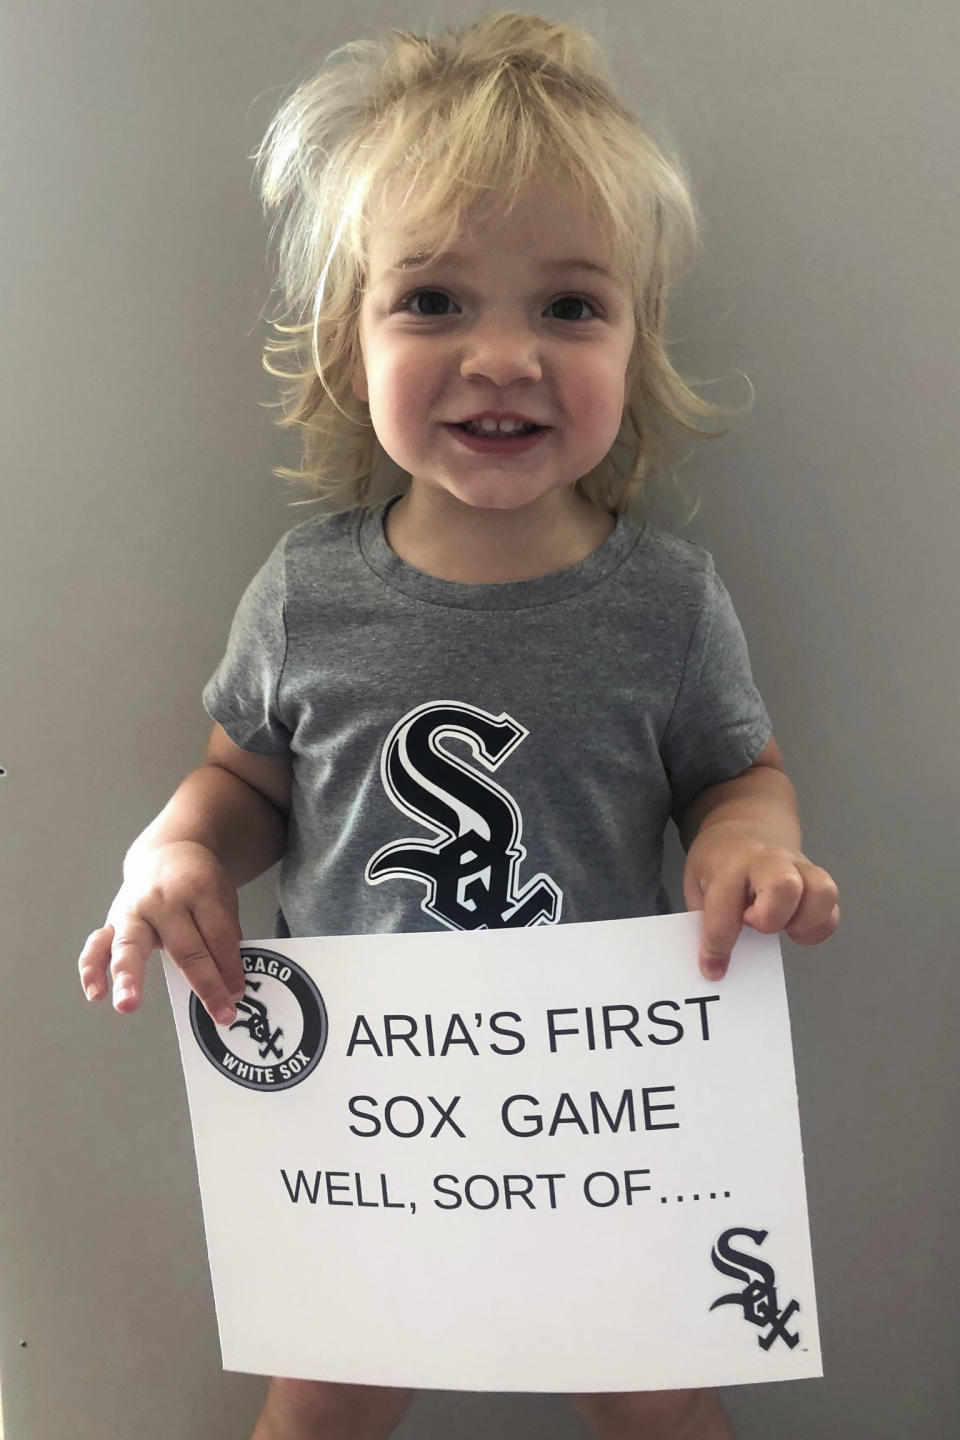 This photo provided by Michael Izzo shows two-year-old Aria Izzo's photo that will appear in a fan cutout when the Chicago White Sox open the season July 24 against the Minnesota Twins. Michael and Megan Izzo of Oswego, Illinois, wanted to take their 2-year-old daughter, Aria, to her first White Sox game this year. When the pandemic spoiled that plan, the Izzos made sure to get their daughter’s face on a cutout that can eventually become a family keepsake. (Michael Izzo via AP)